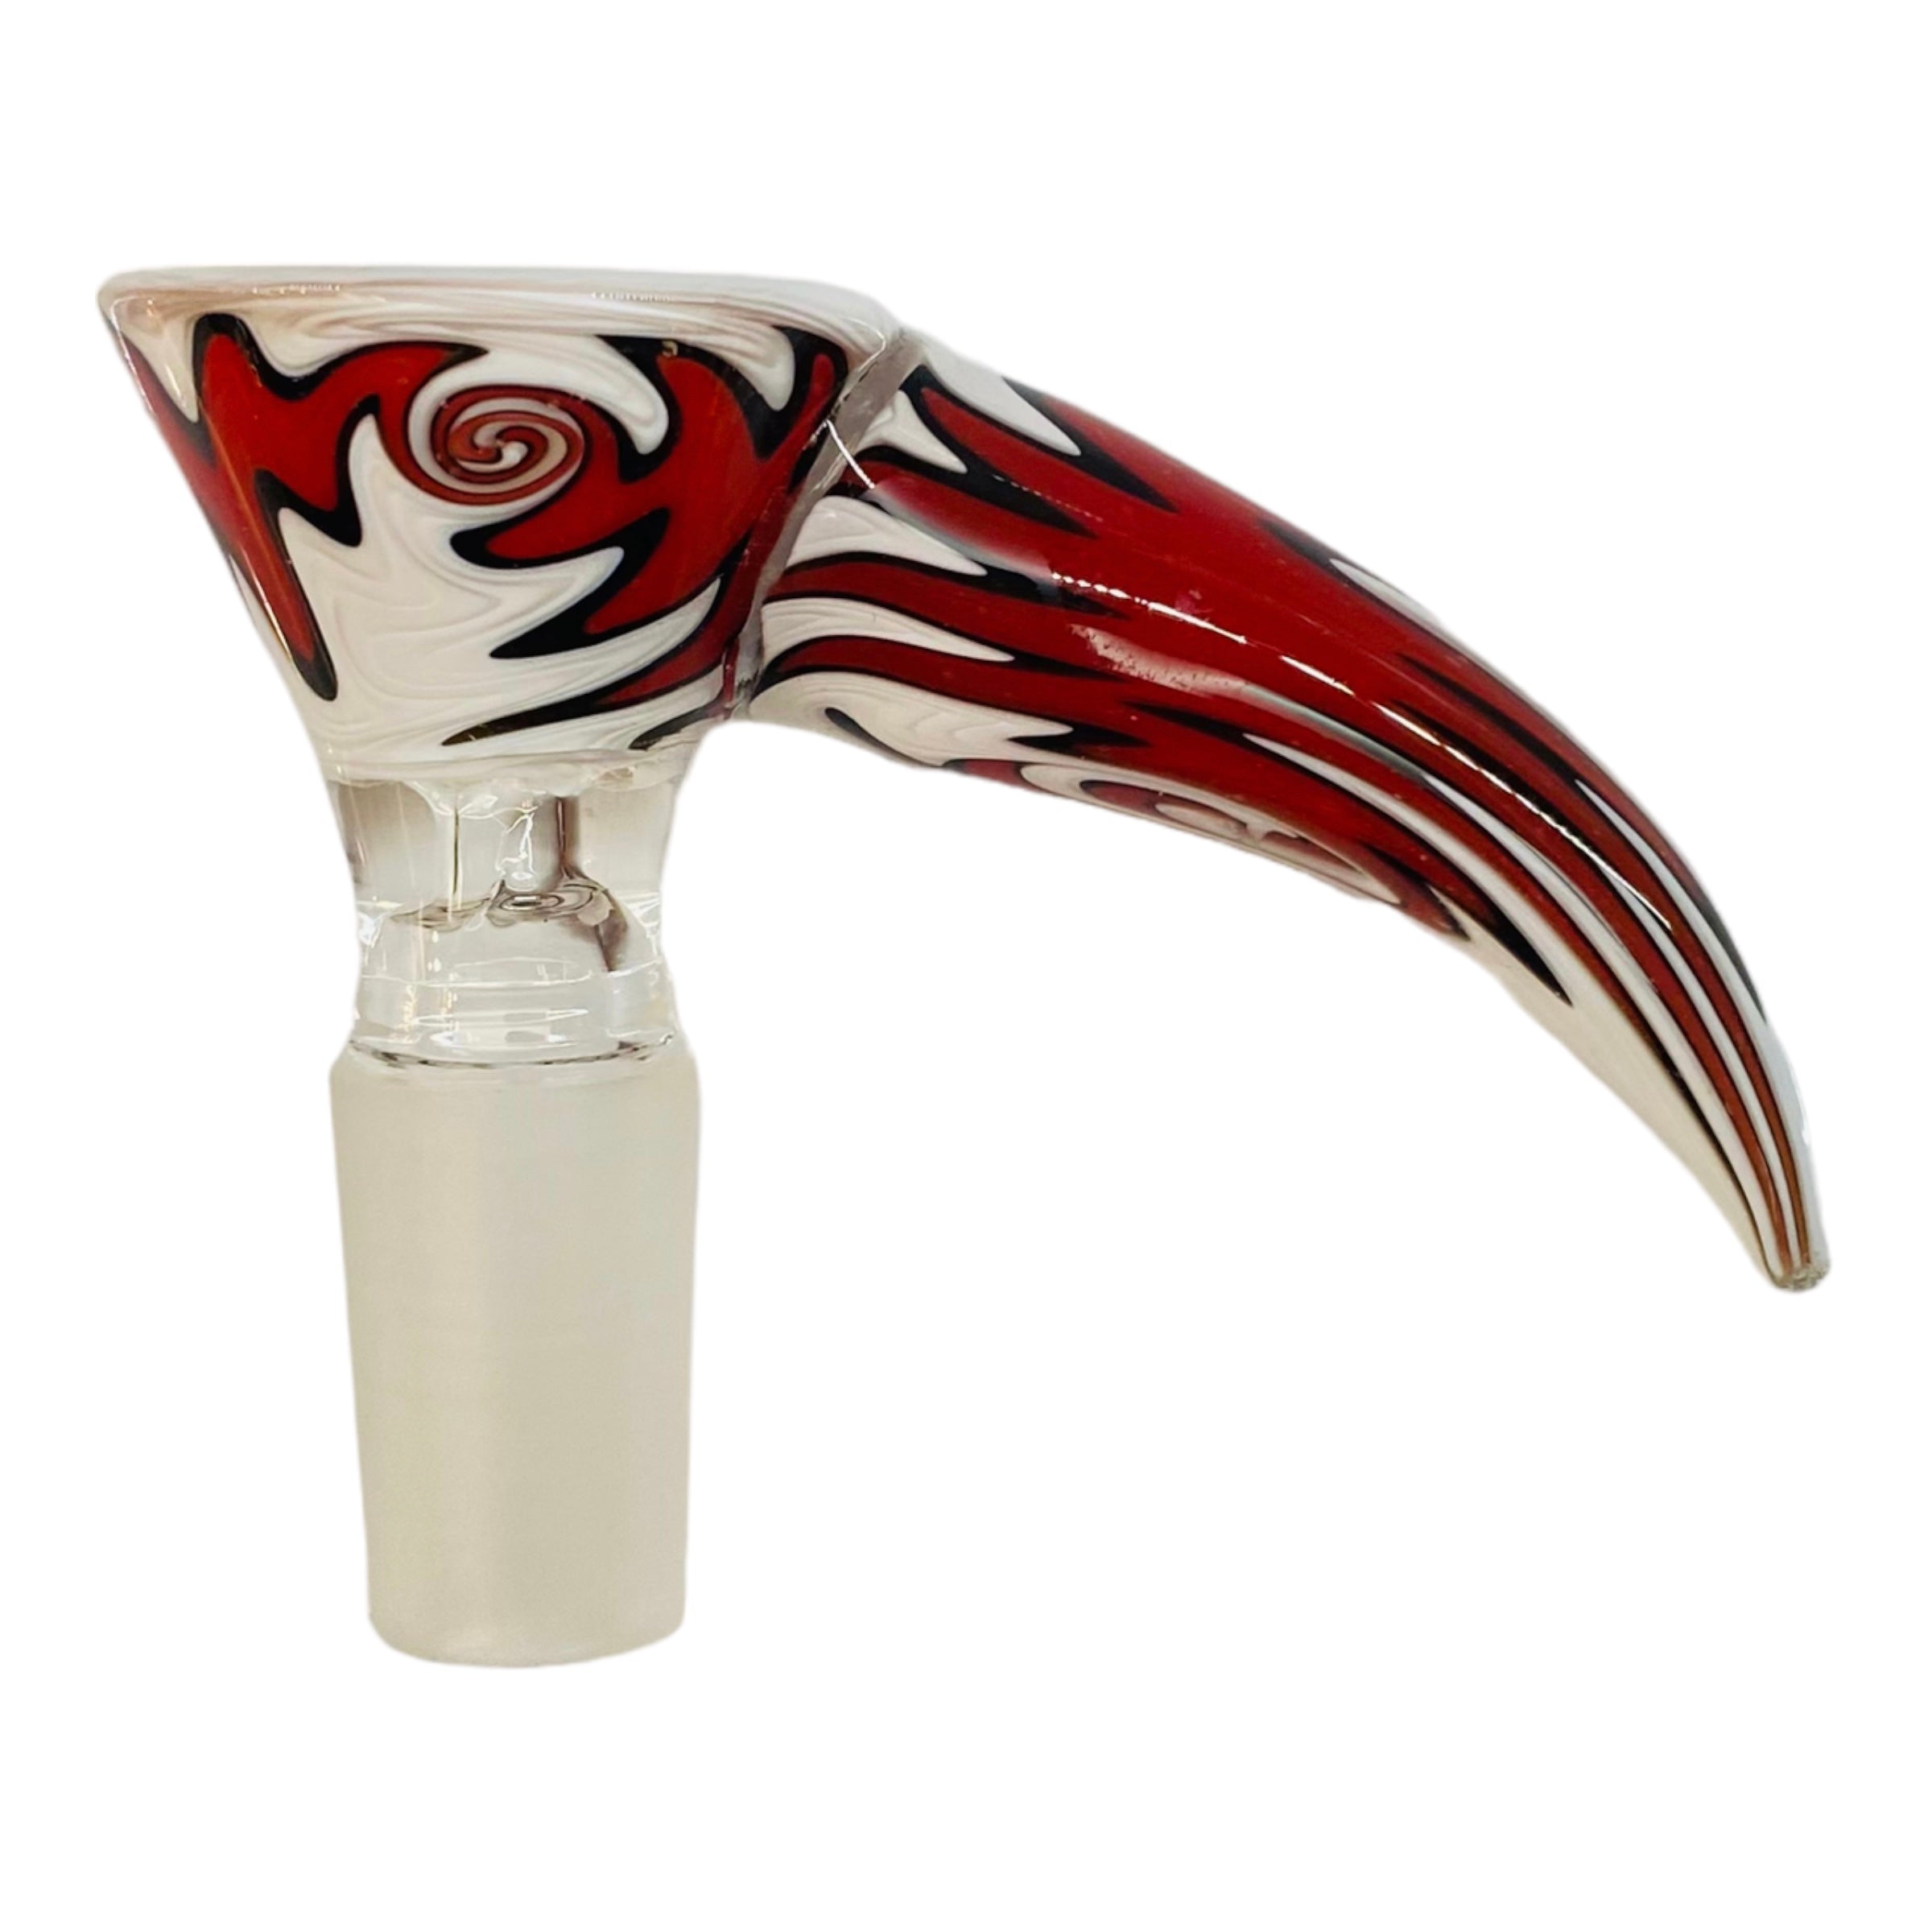 14mm Flower Bowls - Large Horn Martini Bong Bowl Piece With Color Wig Wag - Red, Black, And White